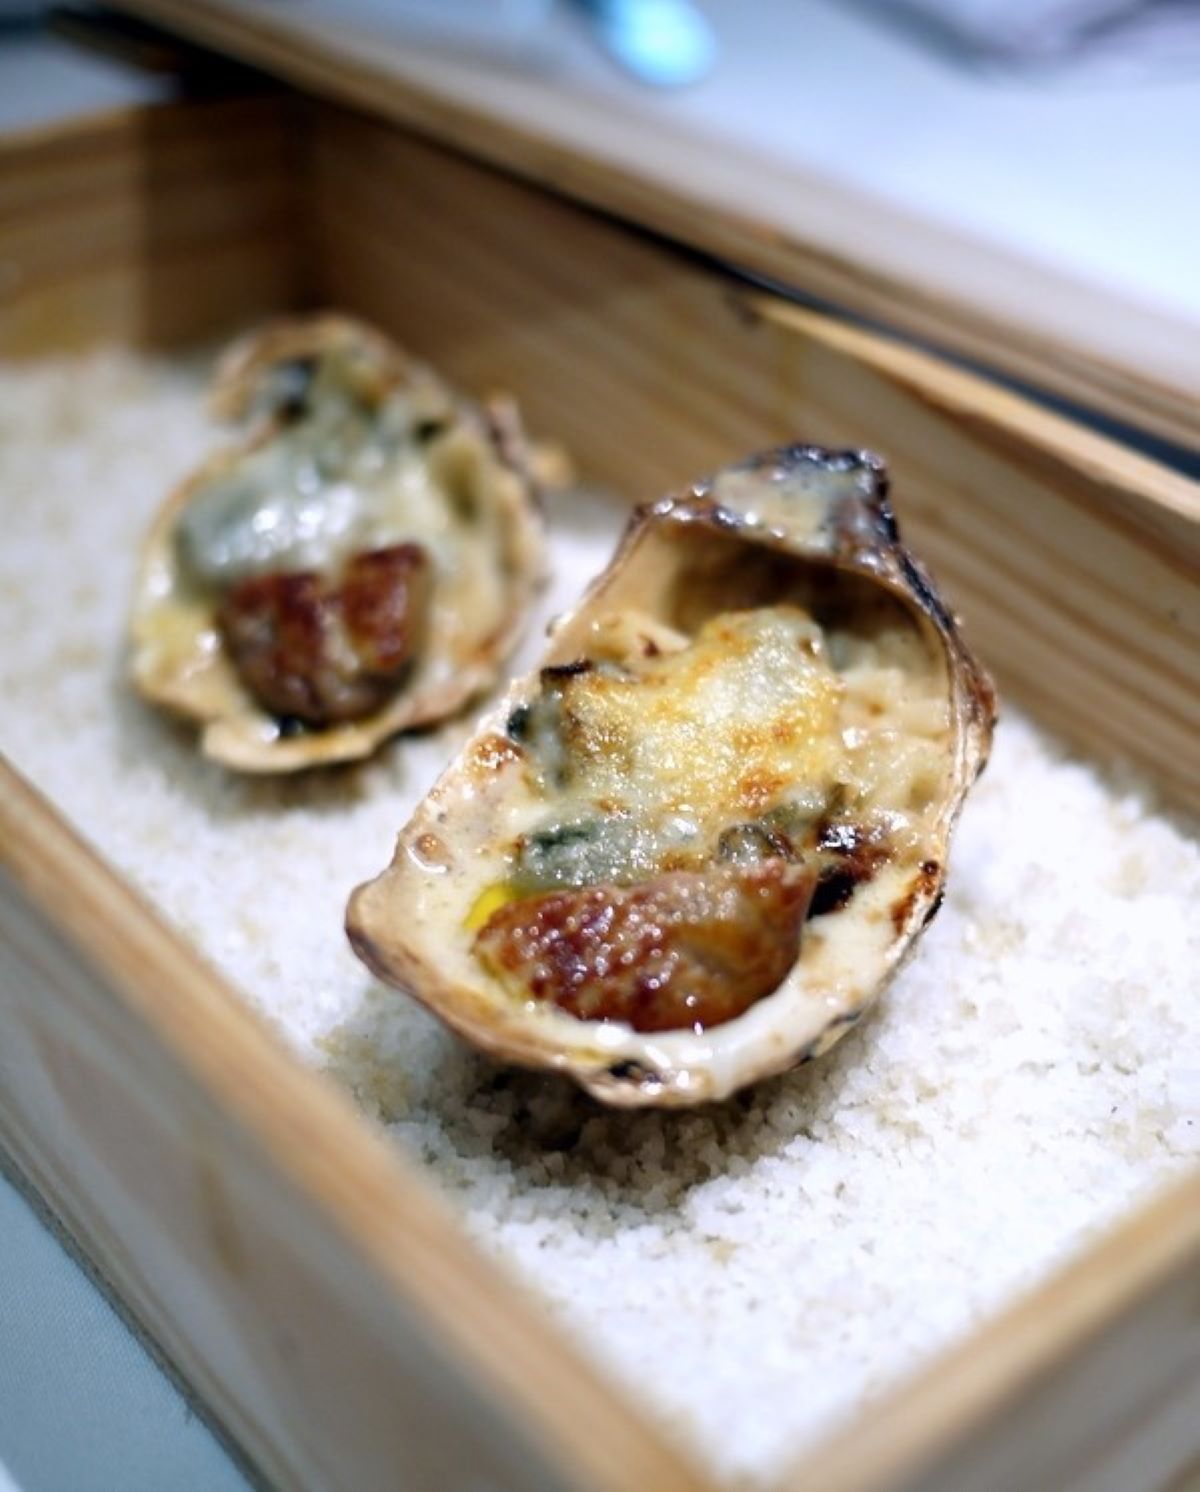 baked oysters on salt in wooden box